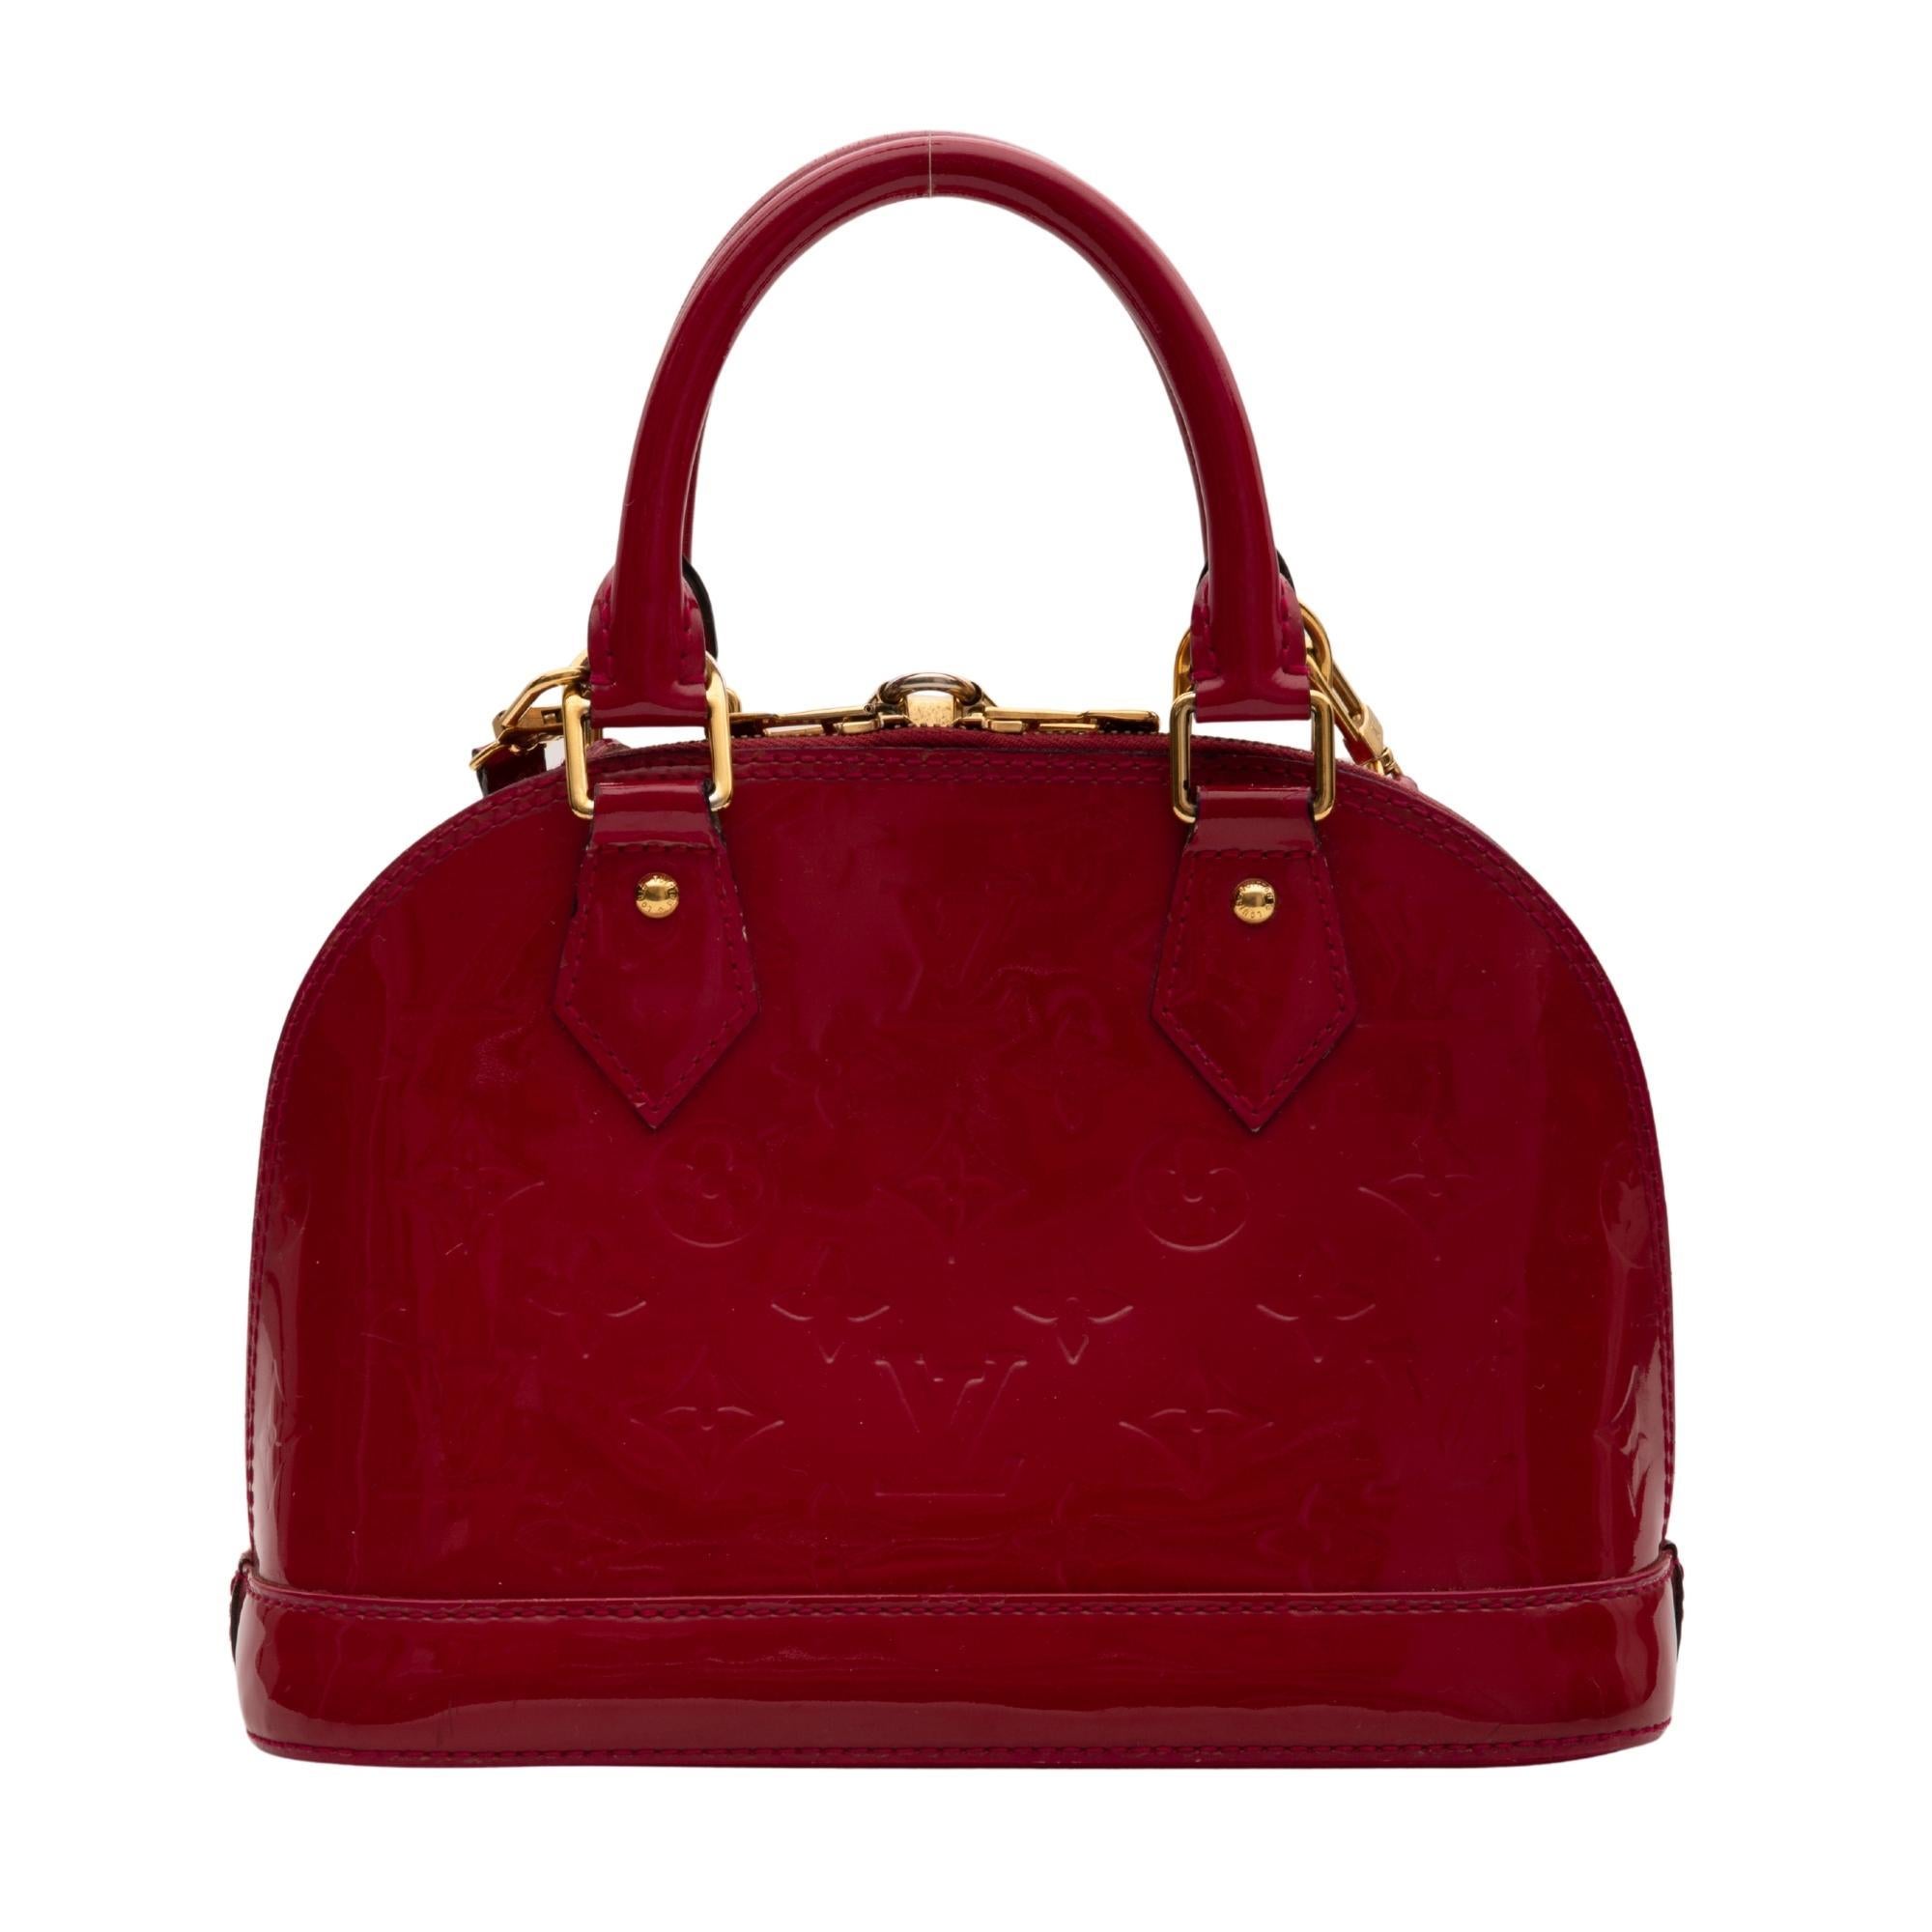 This small Alma is constructed with monogram embossed vernis patent leather in red. The handbag features dual rolled leather top handles, an optional shoulder strap, polished brass hardware, a hanging clochette for the keys, wrap around zip closure